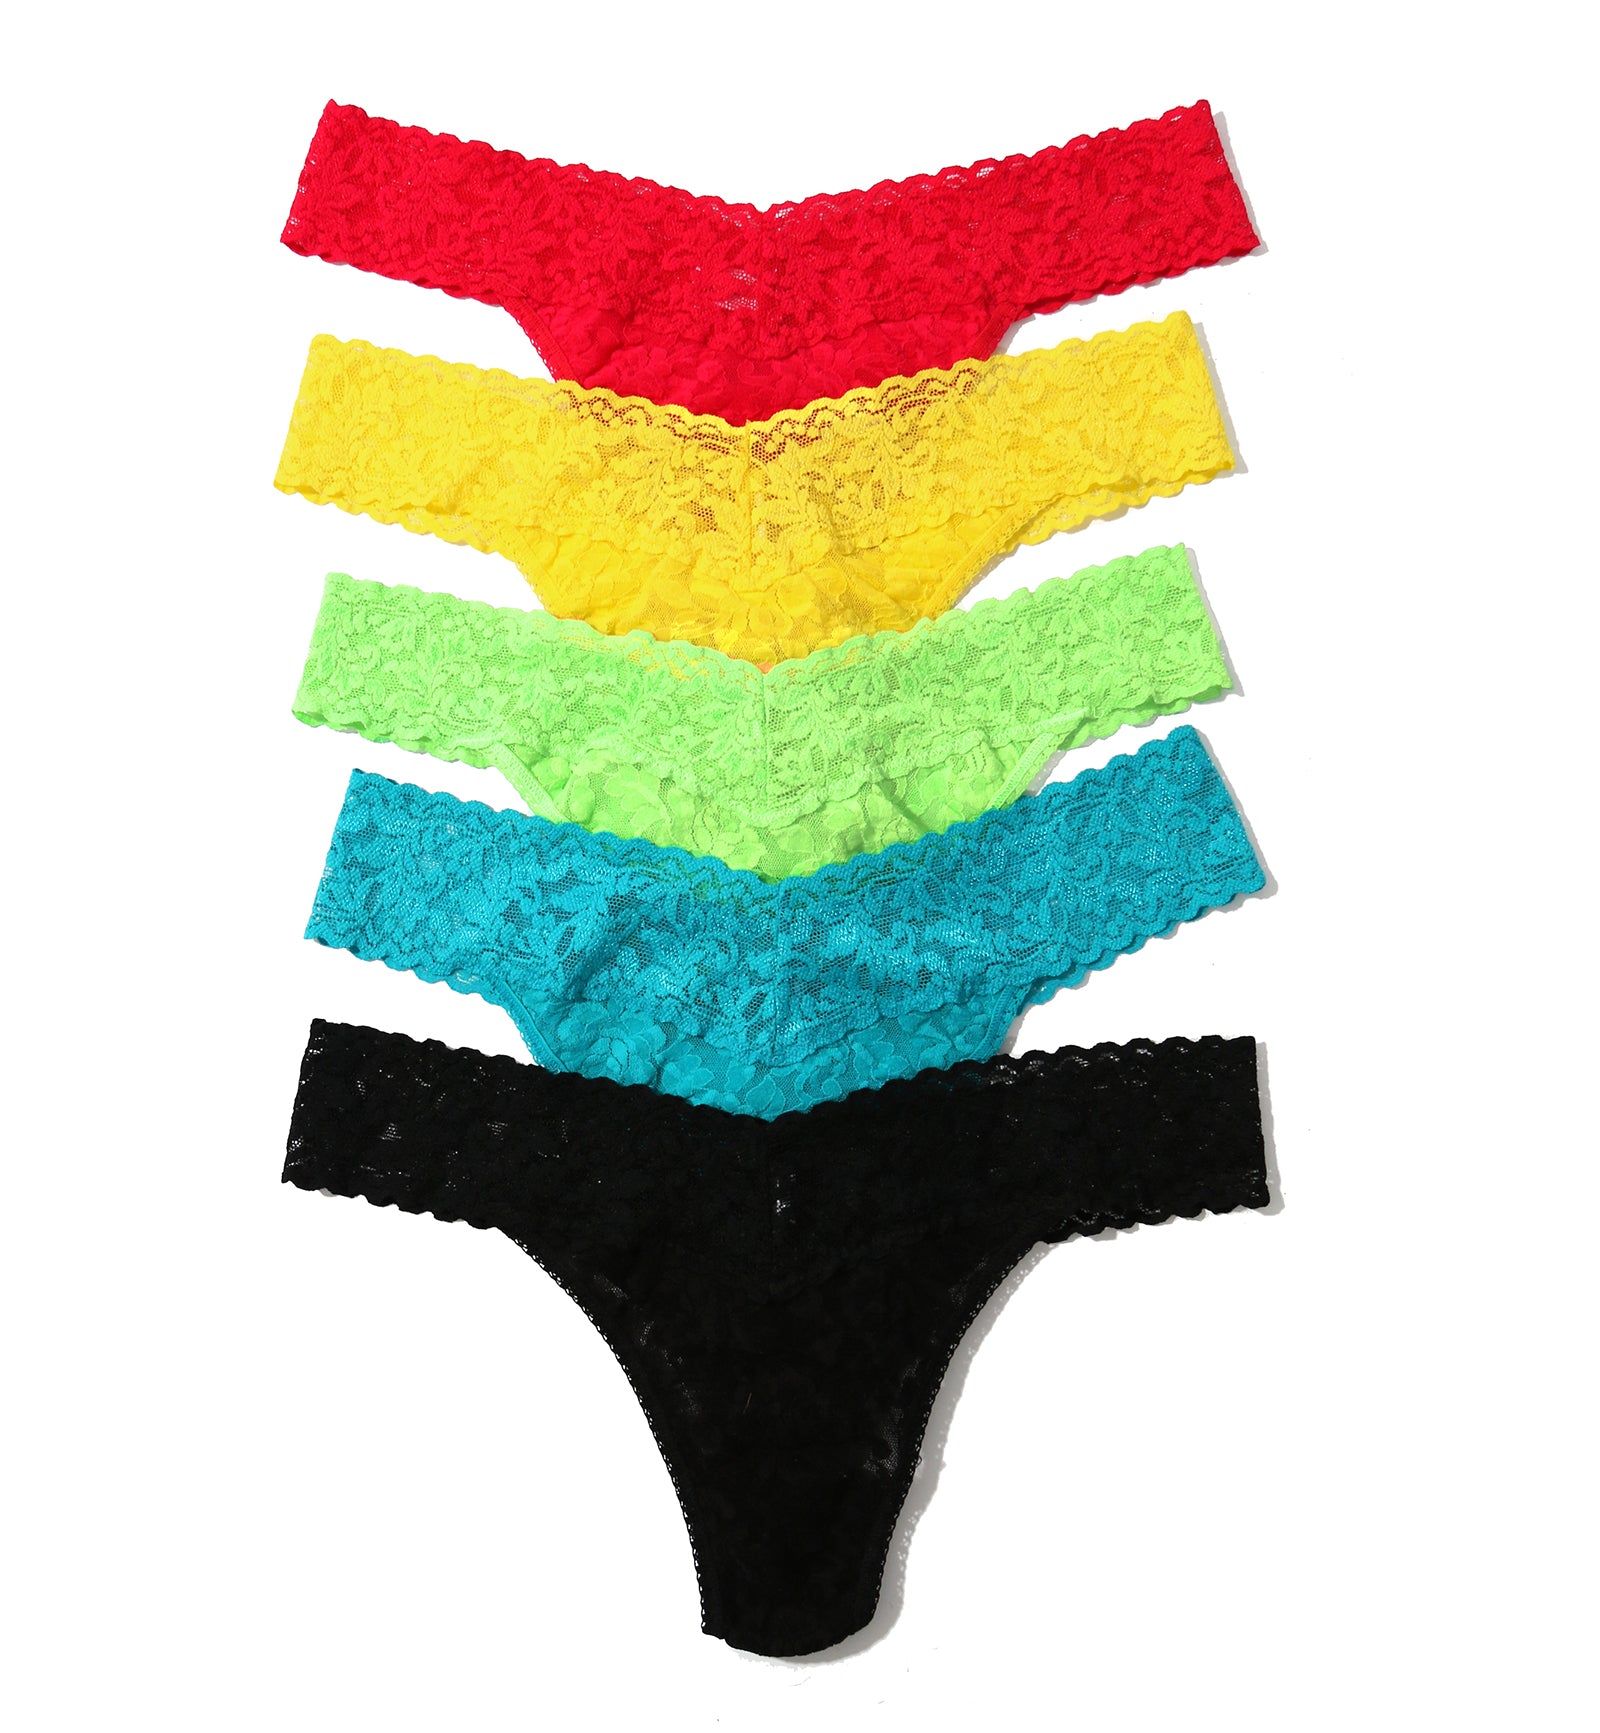 Hanky Panky 5-PACK Signature Lace Original Rise Thong (48115PK),Extra Spice - Extra Spice,One Size